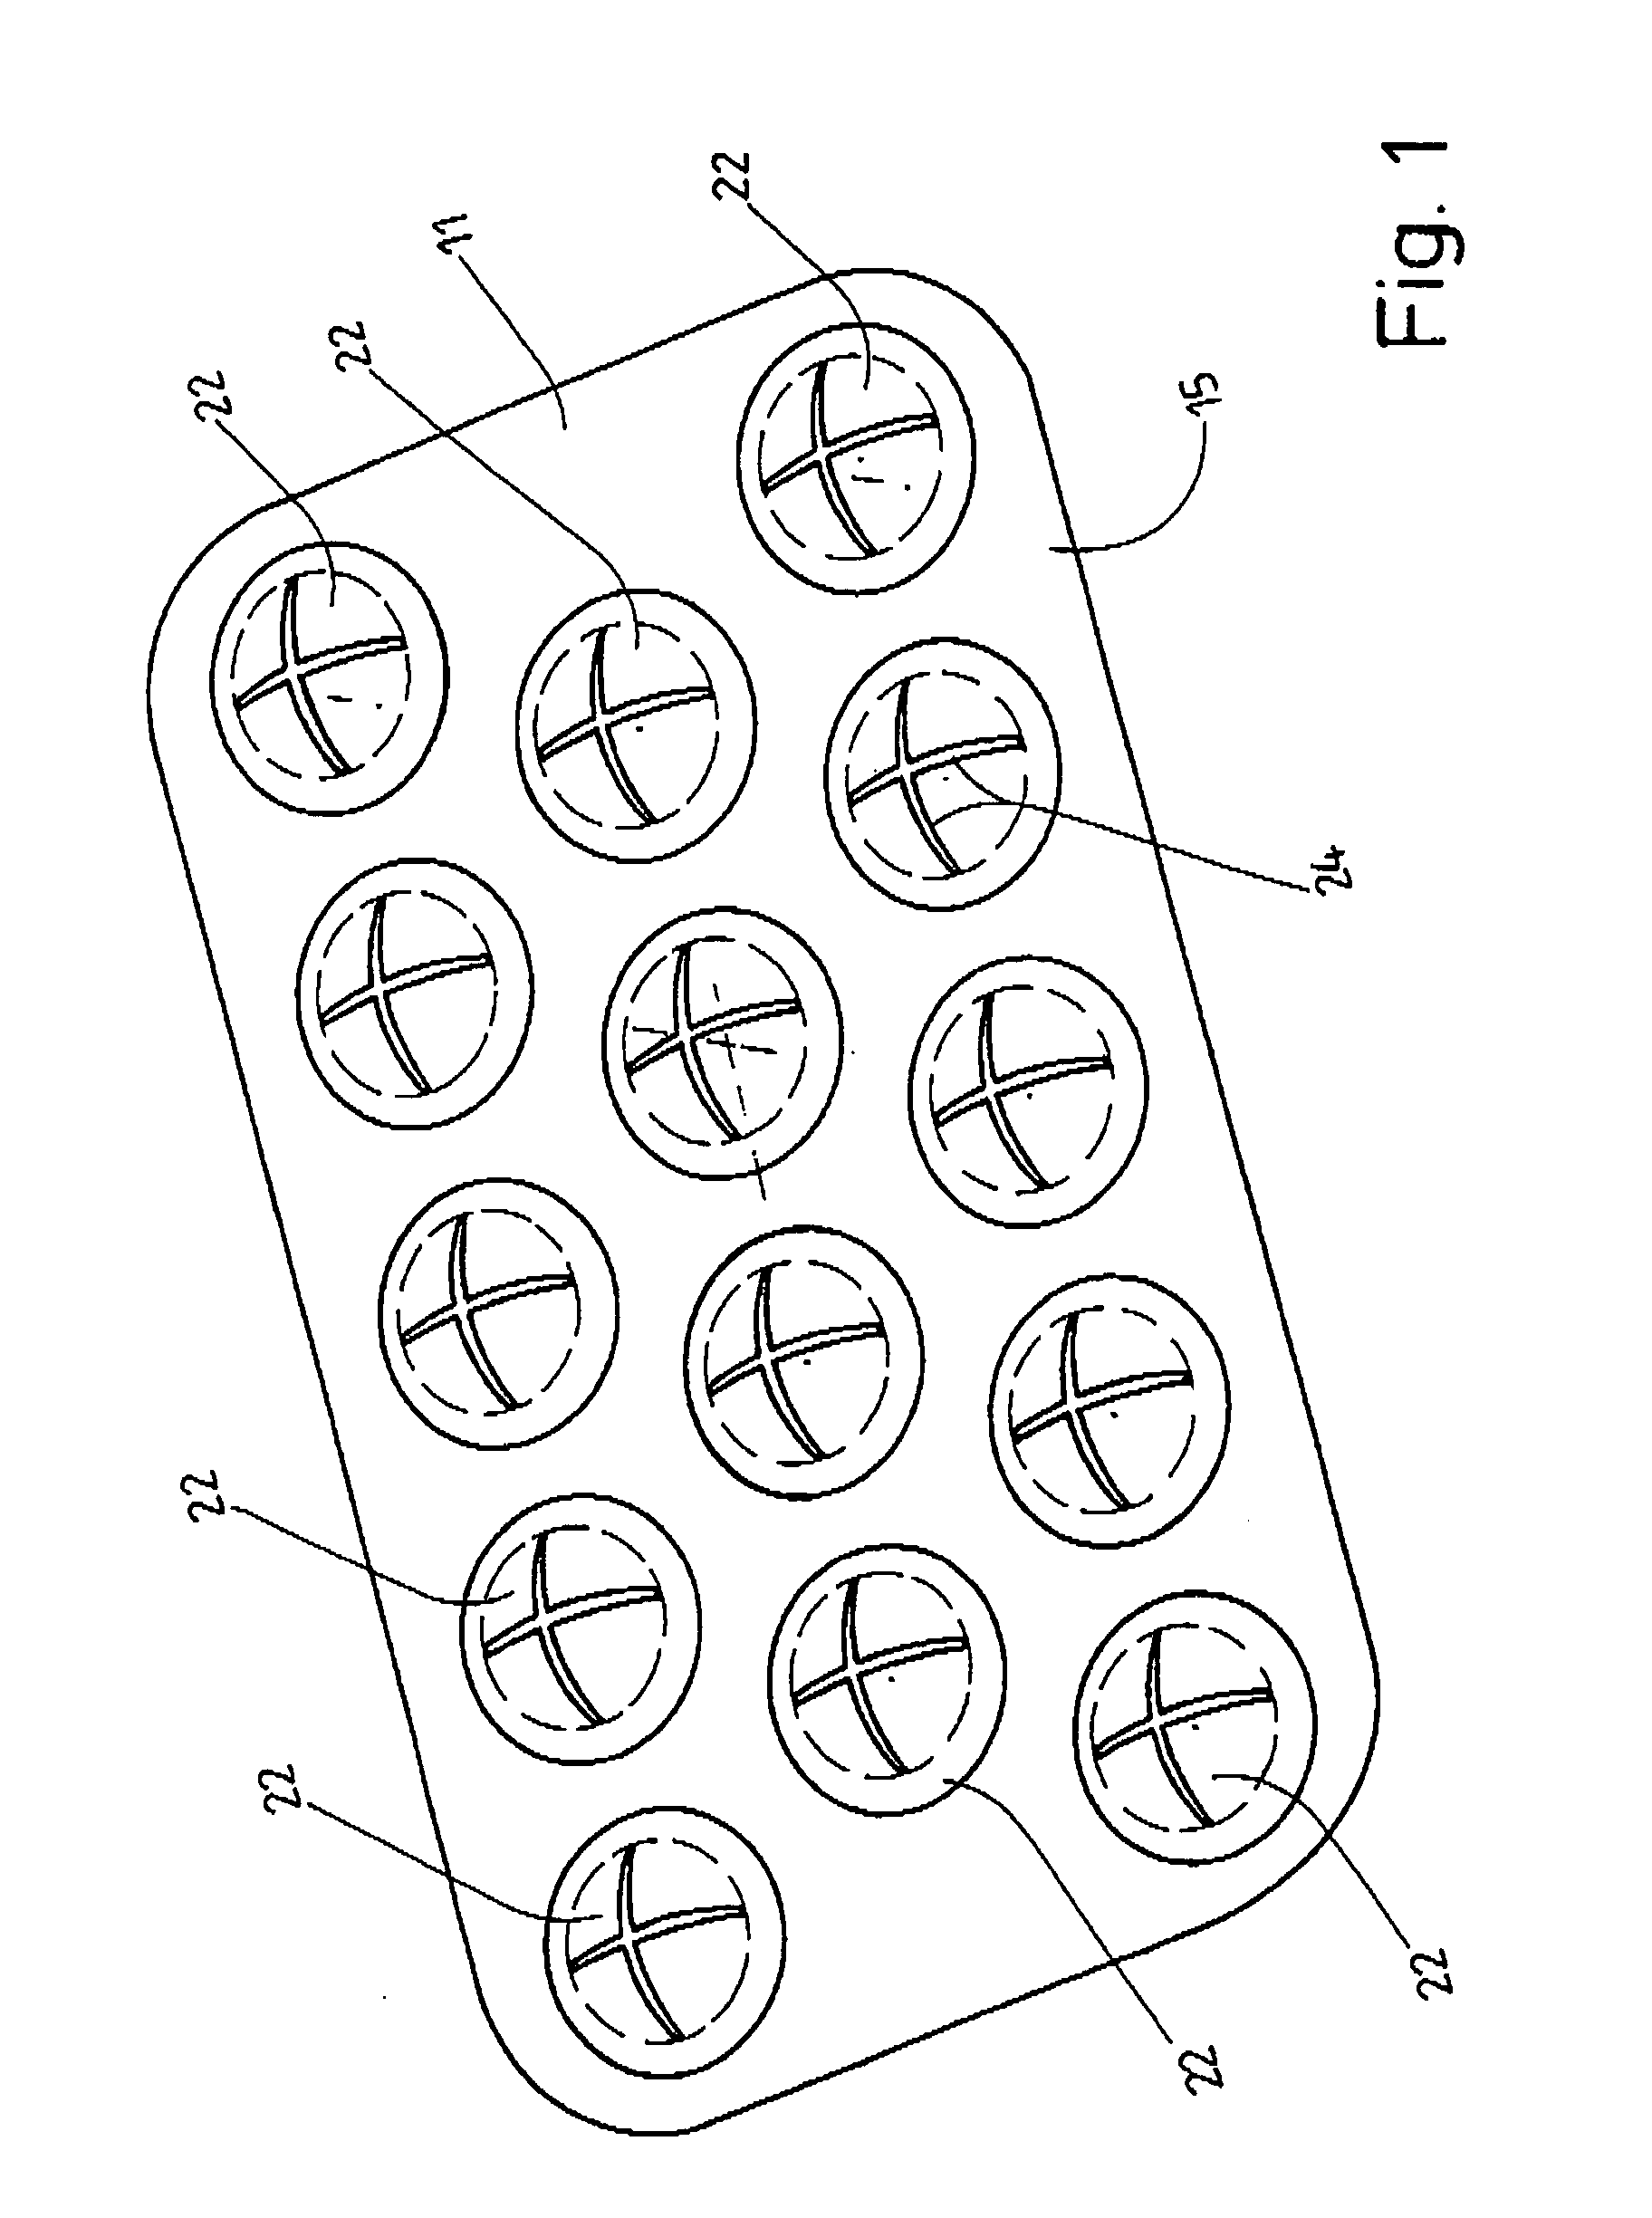 Device for generating pyrotechnic effects